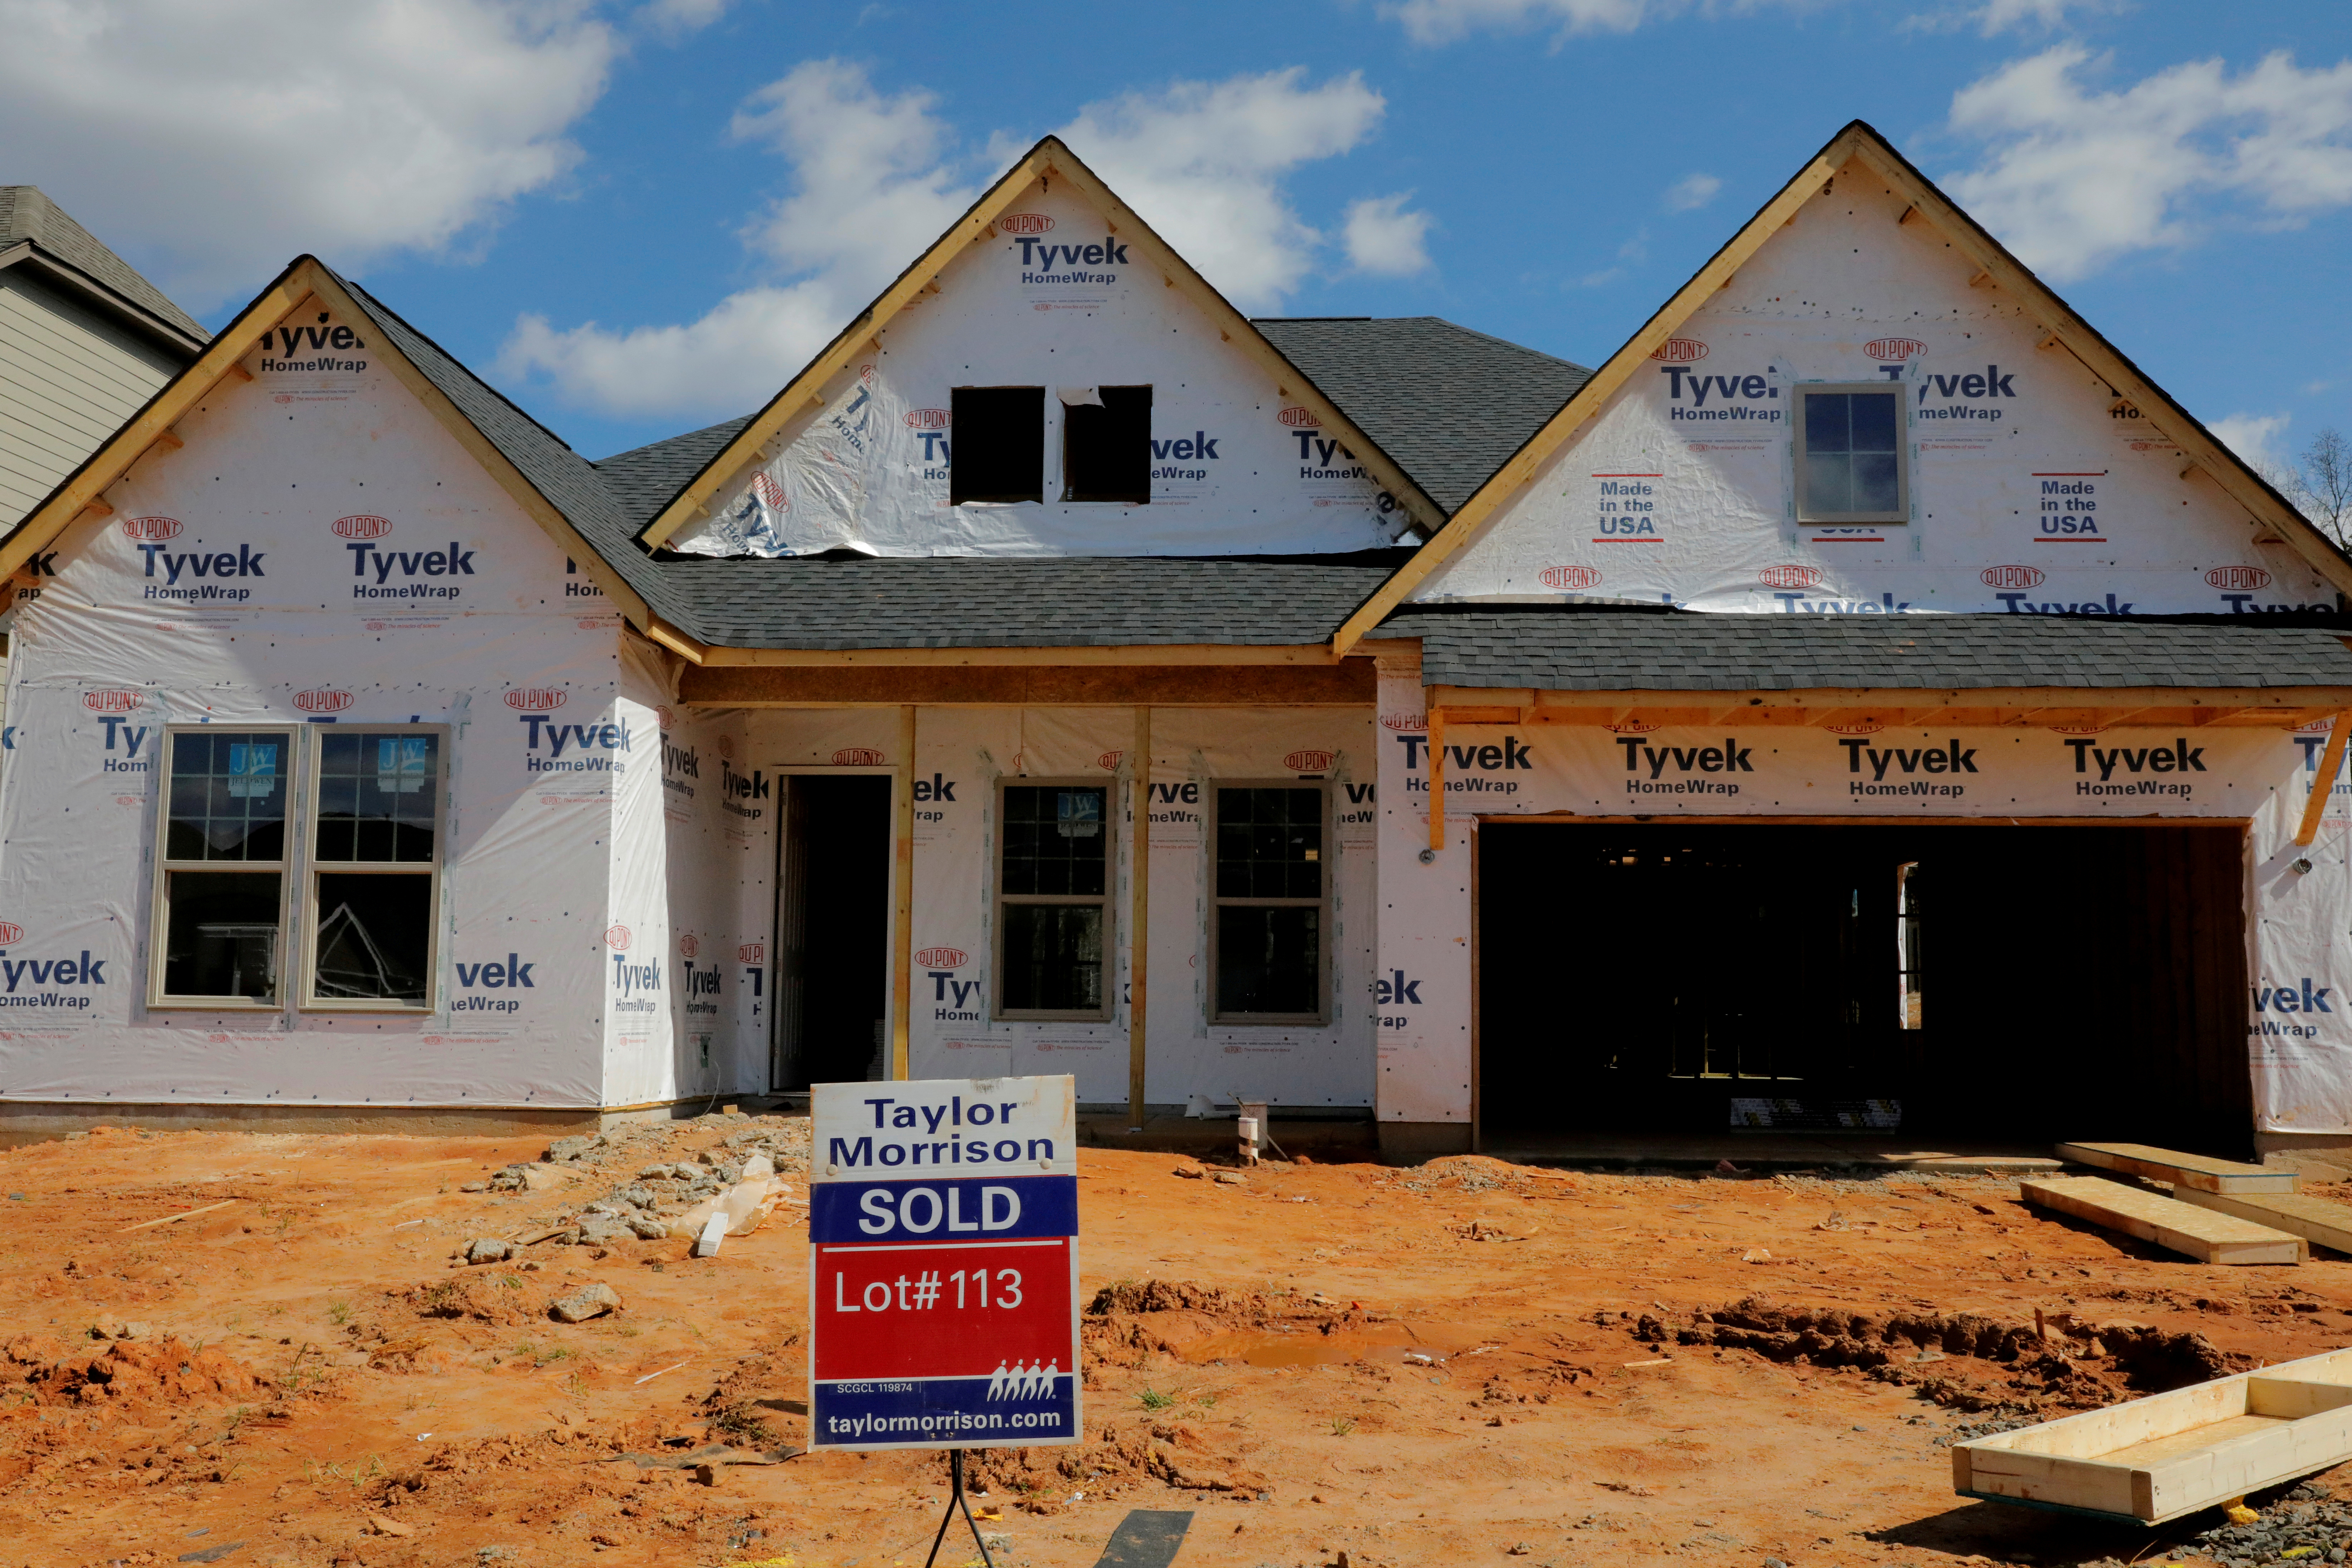 A home under construction stands behind a "sold" sign in a new development in York County, South Carolina